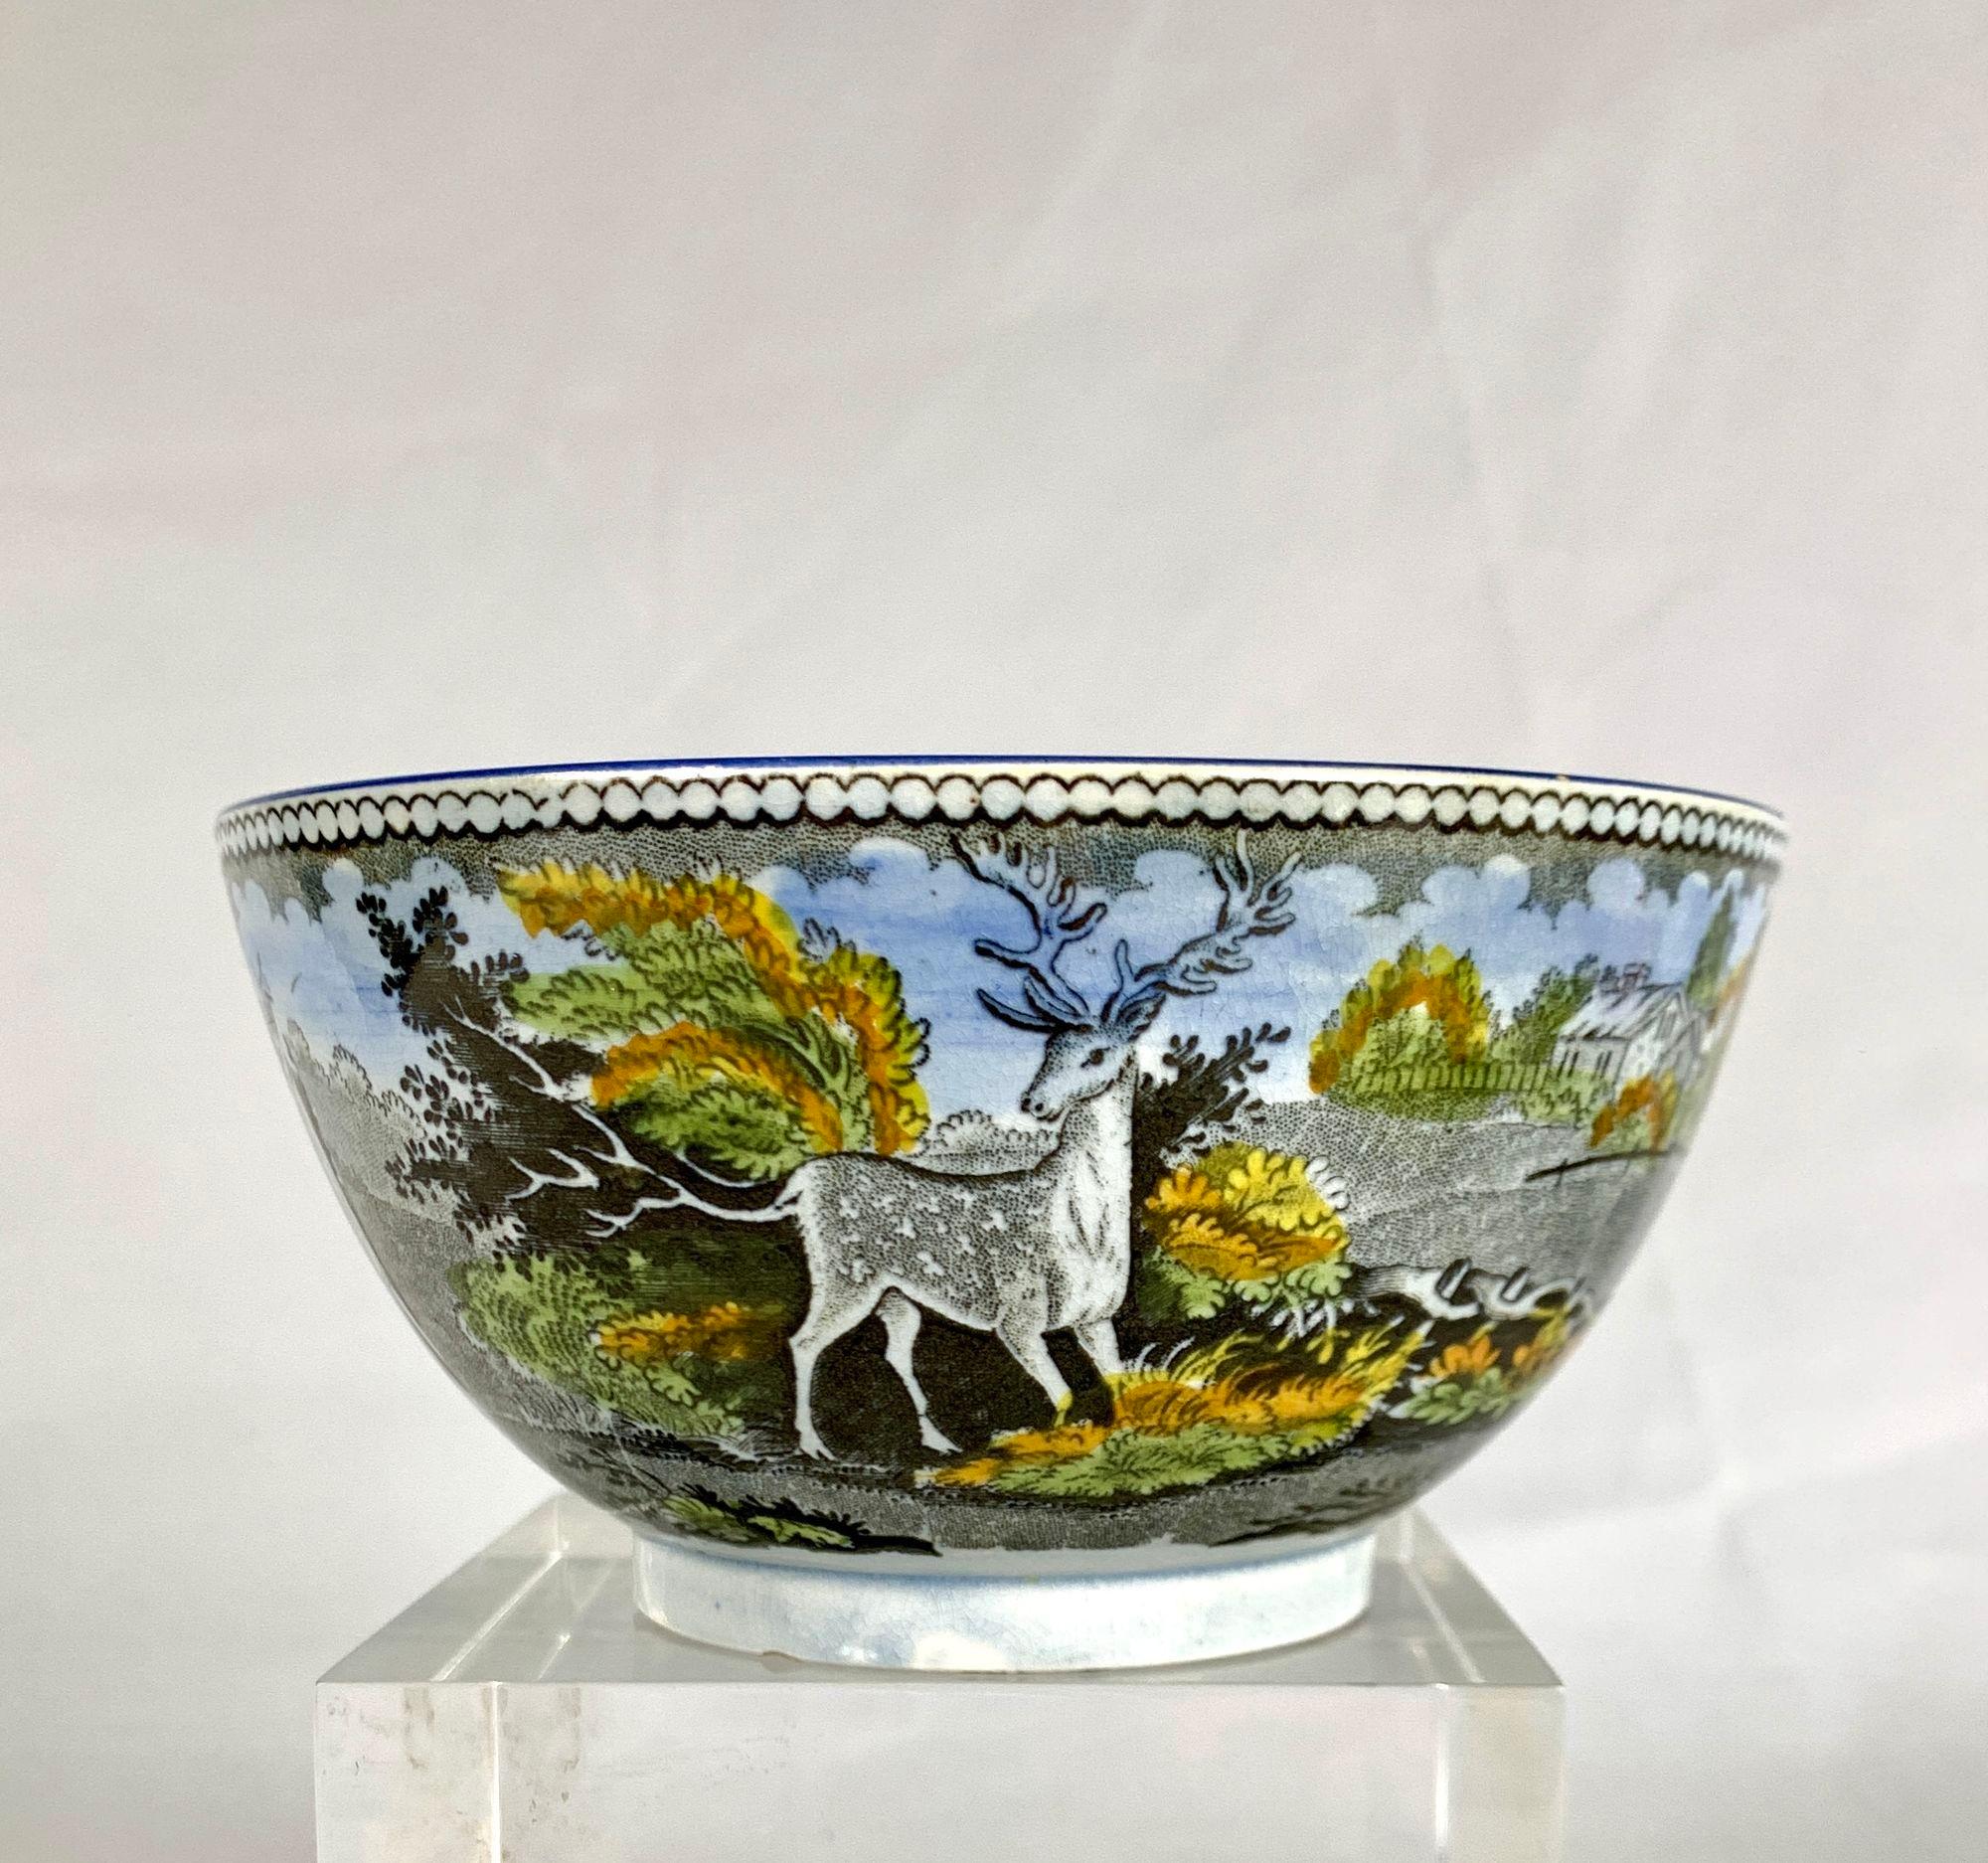 This is a small bowl that displays a beautiful scene of a stag standing at the edge of a clearing.
In the background, there is a small house with a fenced garden.
This type of earthenware is known as Salopian pottery, which was popular in the early